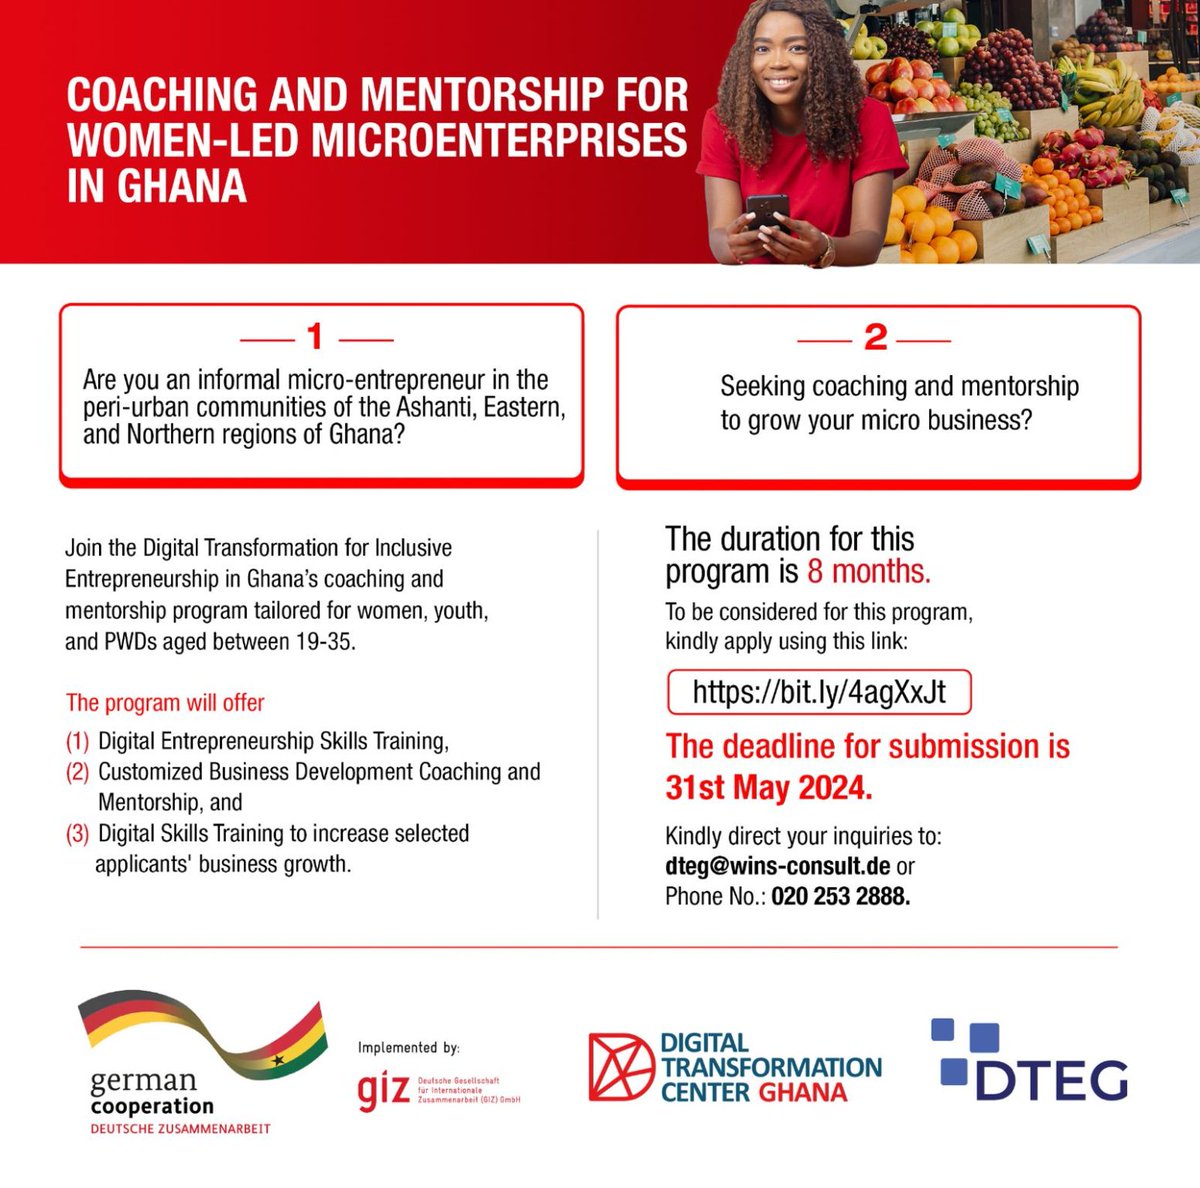 Coaching And Mentorship For Women-Led Micro-Enterprises In Ghana 

 accessagric.com/coaching-and-m…

#coaching #mentorship #women #microenterprise #ghana